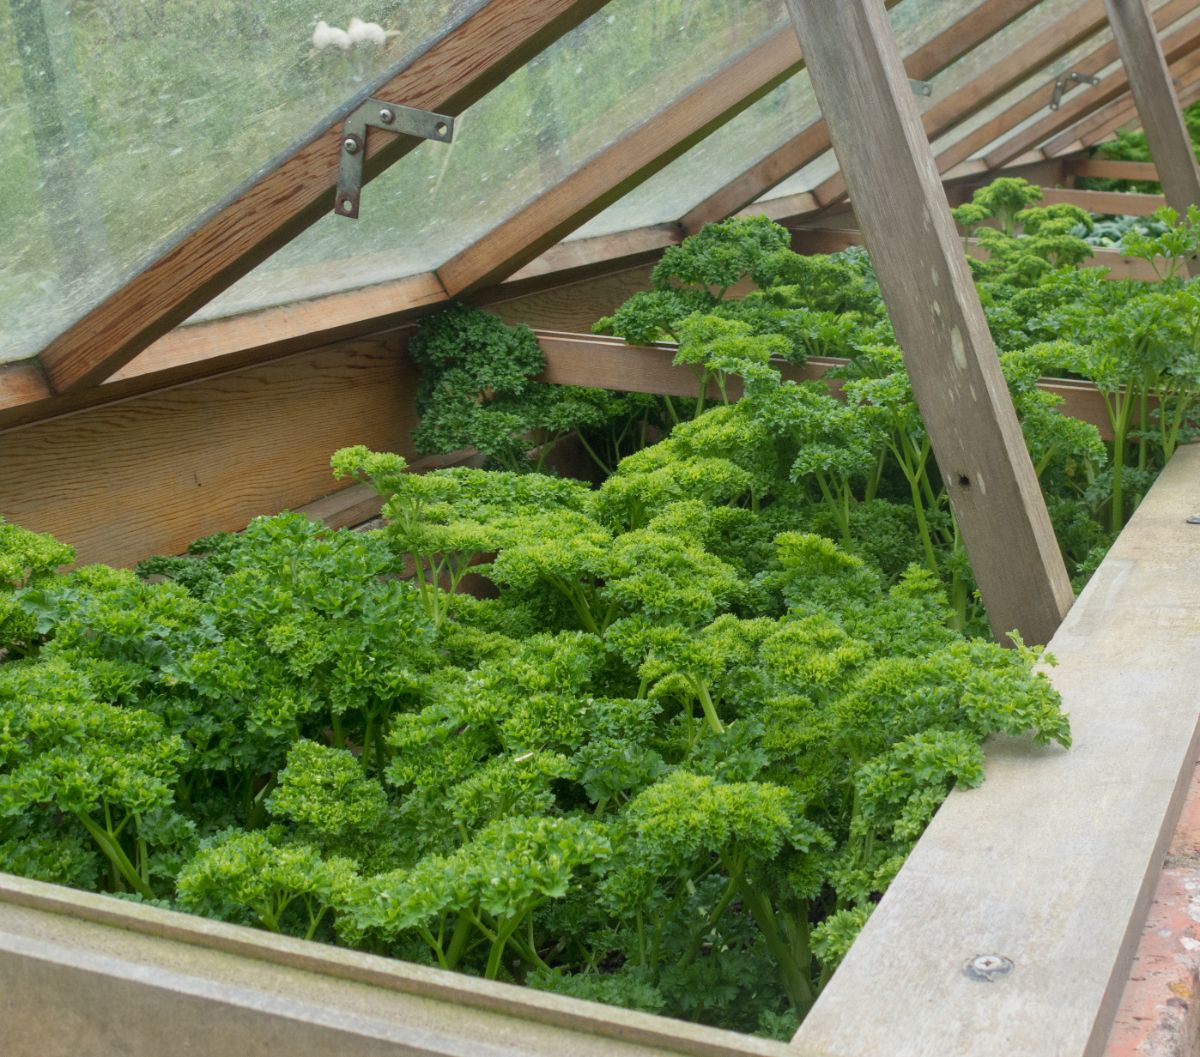 A cold frame filled with hardy growing greens